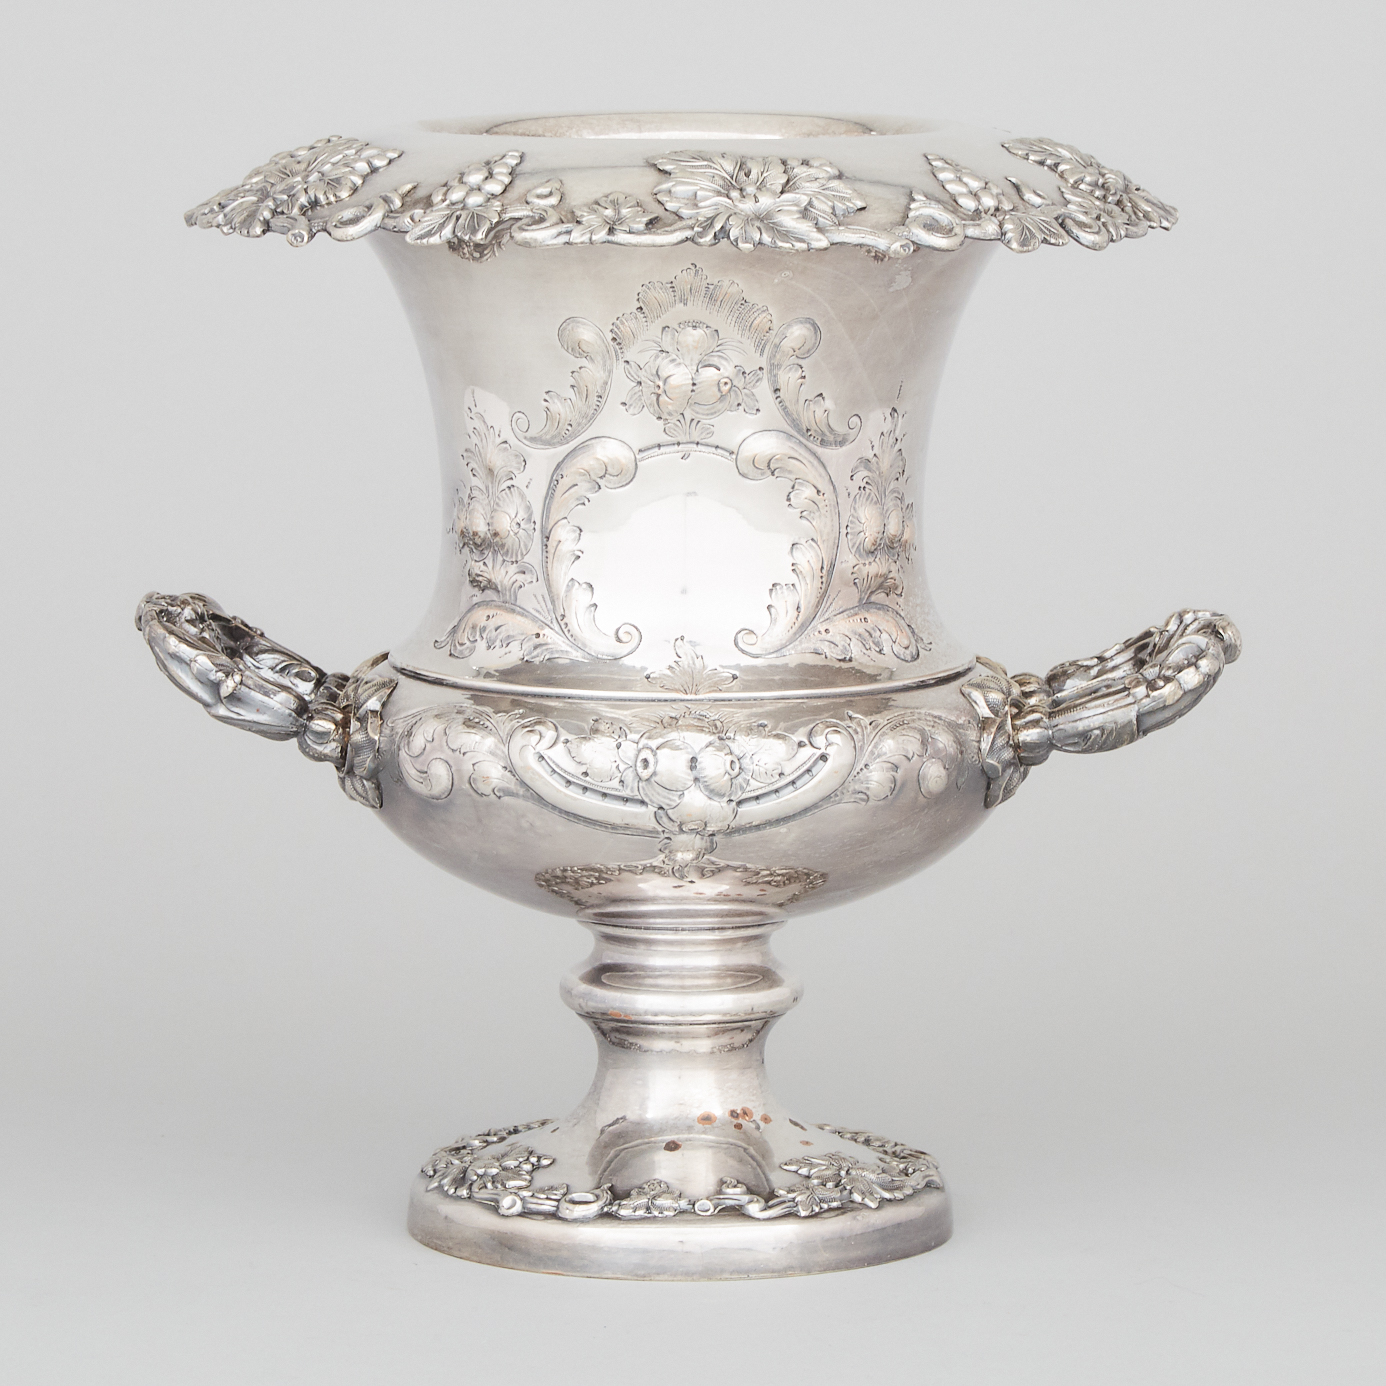 Victorian Silver Plated Wine Cooler, 19th century